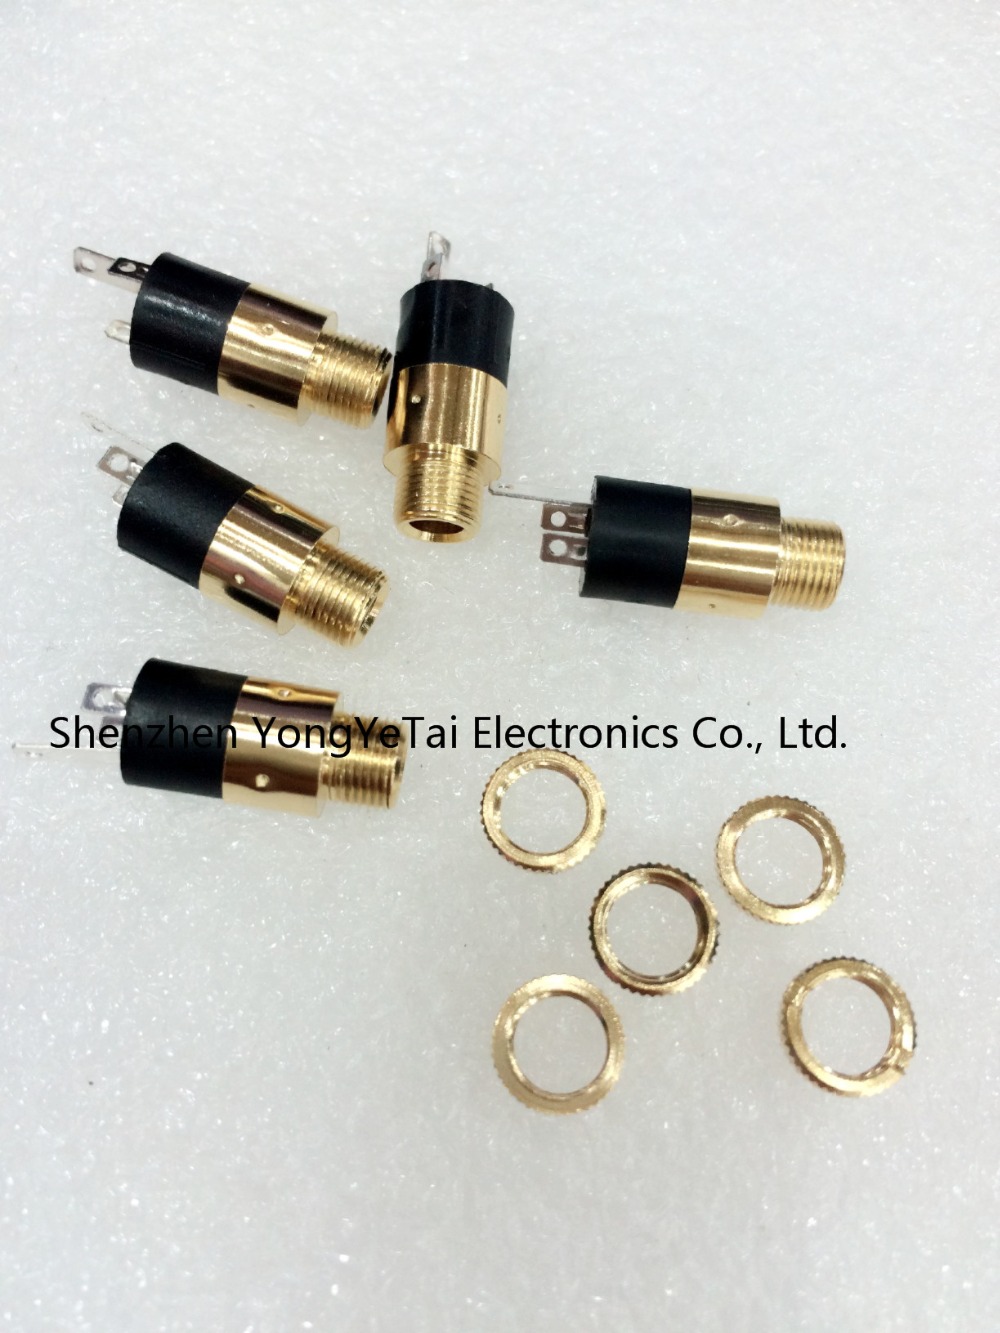 3.5MM   PJ-392    ܼƮ  Ʈ 3 Ʈ   ä  DIP/3.5MM headphone jack PJ-392 audio and video outlets 3 foot vertical double channel ban